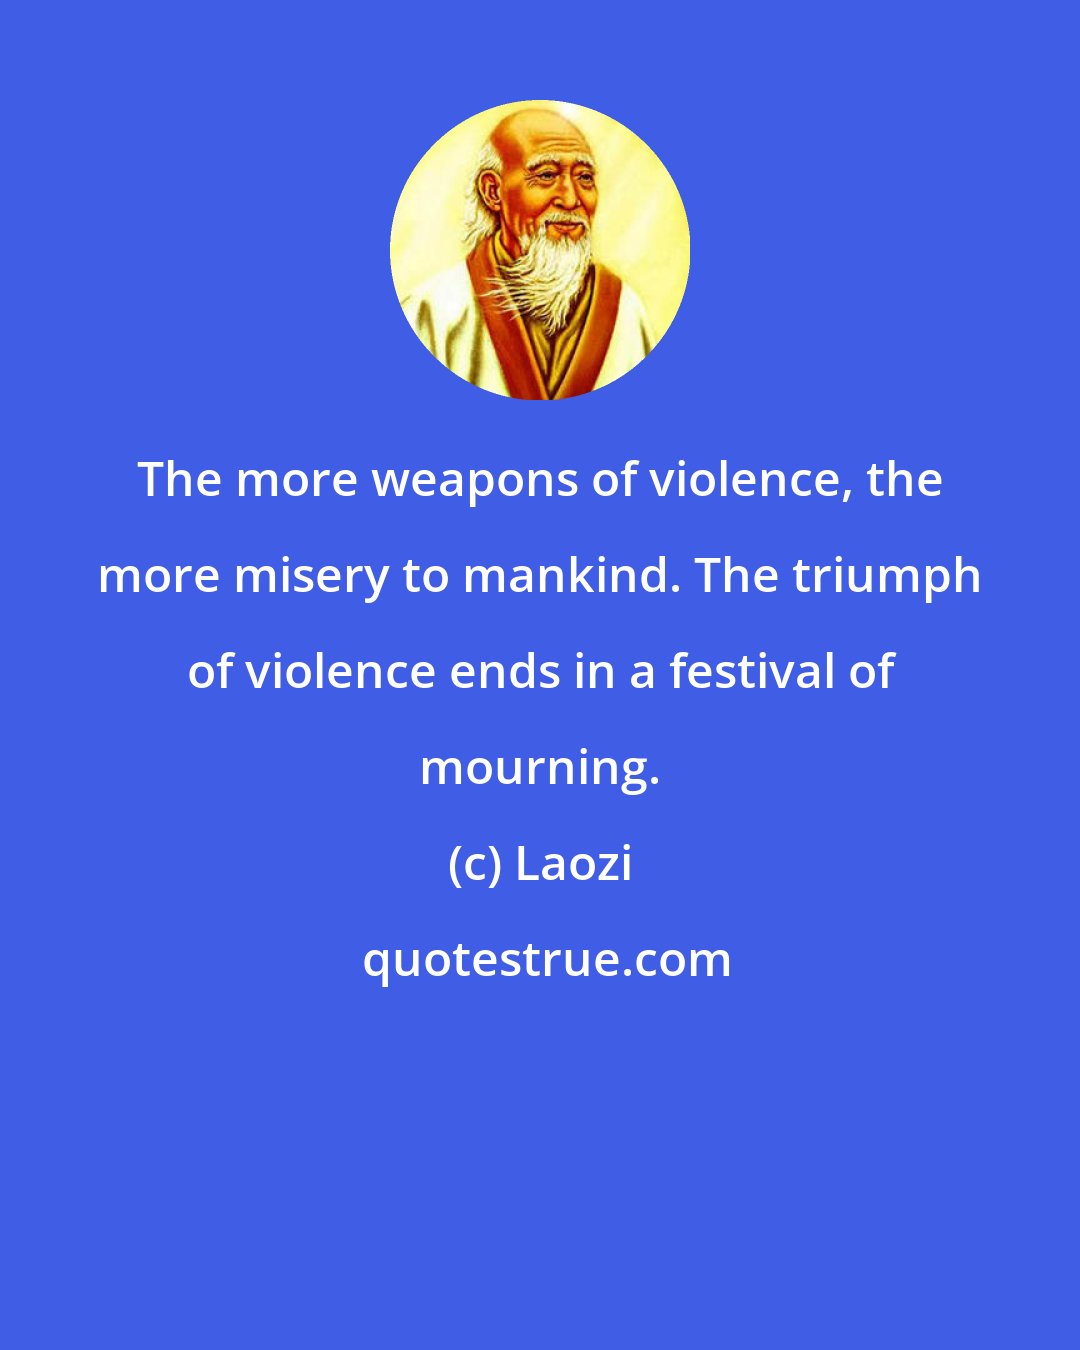 Laozi: The more weapons of violence, the more misery to mankind. The triumph of violence ends in a festival of mourning.